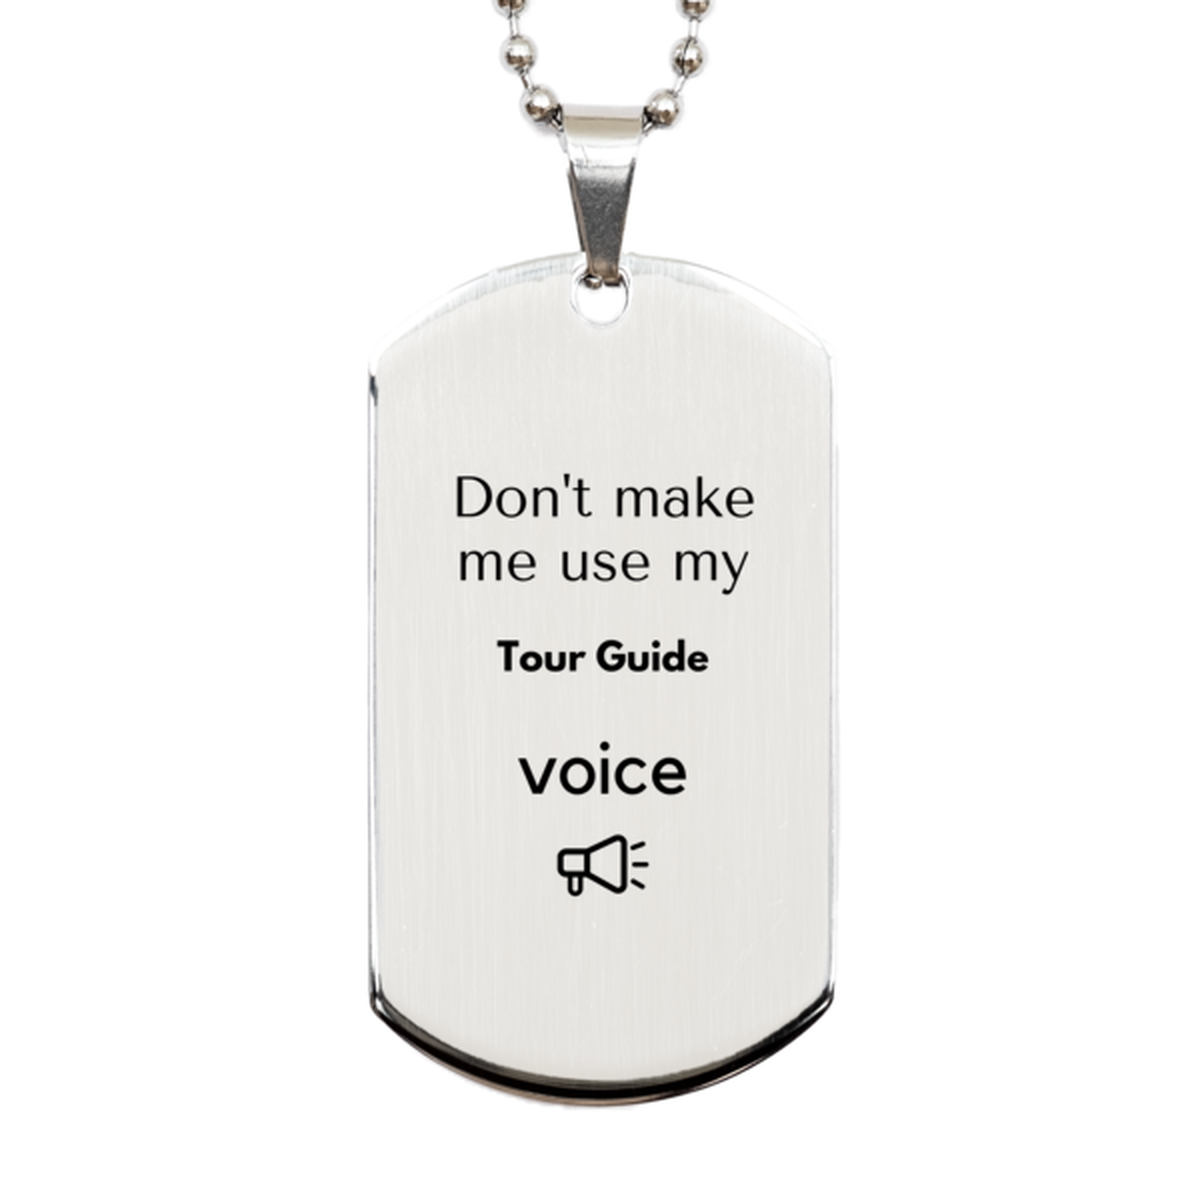 Don't make me use my Tour Guide voice, Sarcasm Tour Guide Gifts, Christmas Tour Guide Silver Dog Tag Birthday Unique Gifts For Tour Guide Coworkers, Men, Women, Colleague, Friends